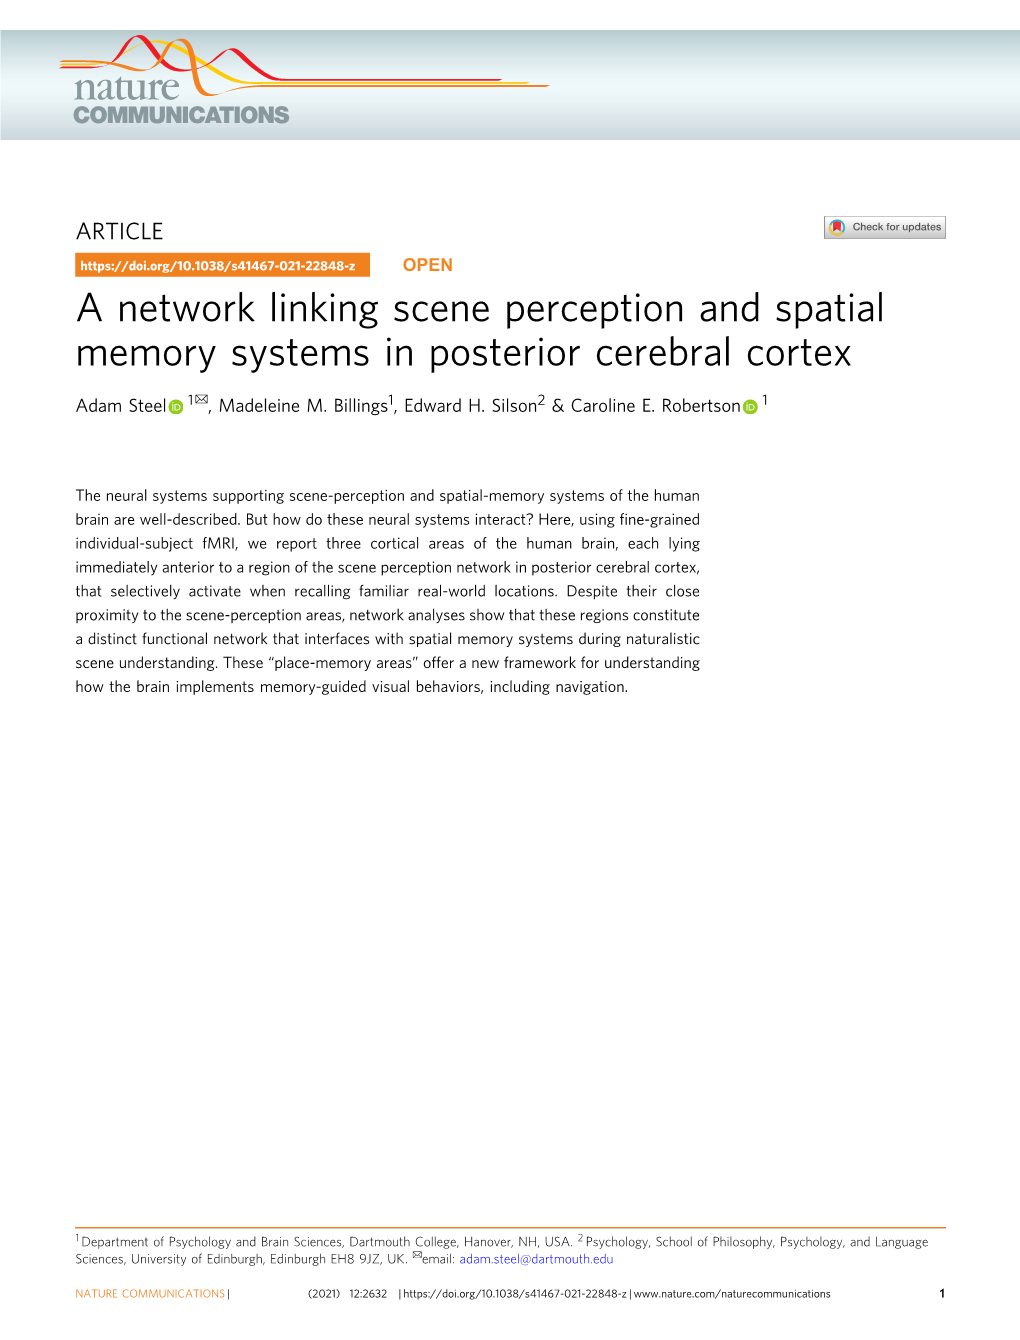 A Network Linking Scene Perception and Spatial Memory Systems in Posterior Cerebral Cortex ✉ Adam Steel 1 , Madeleine M